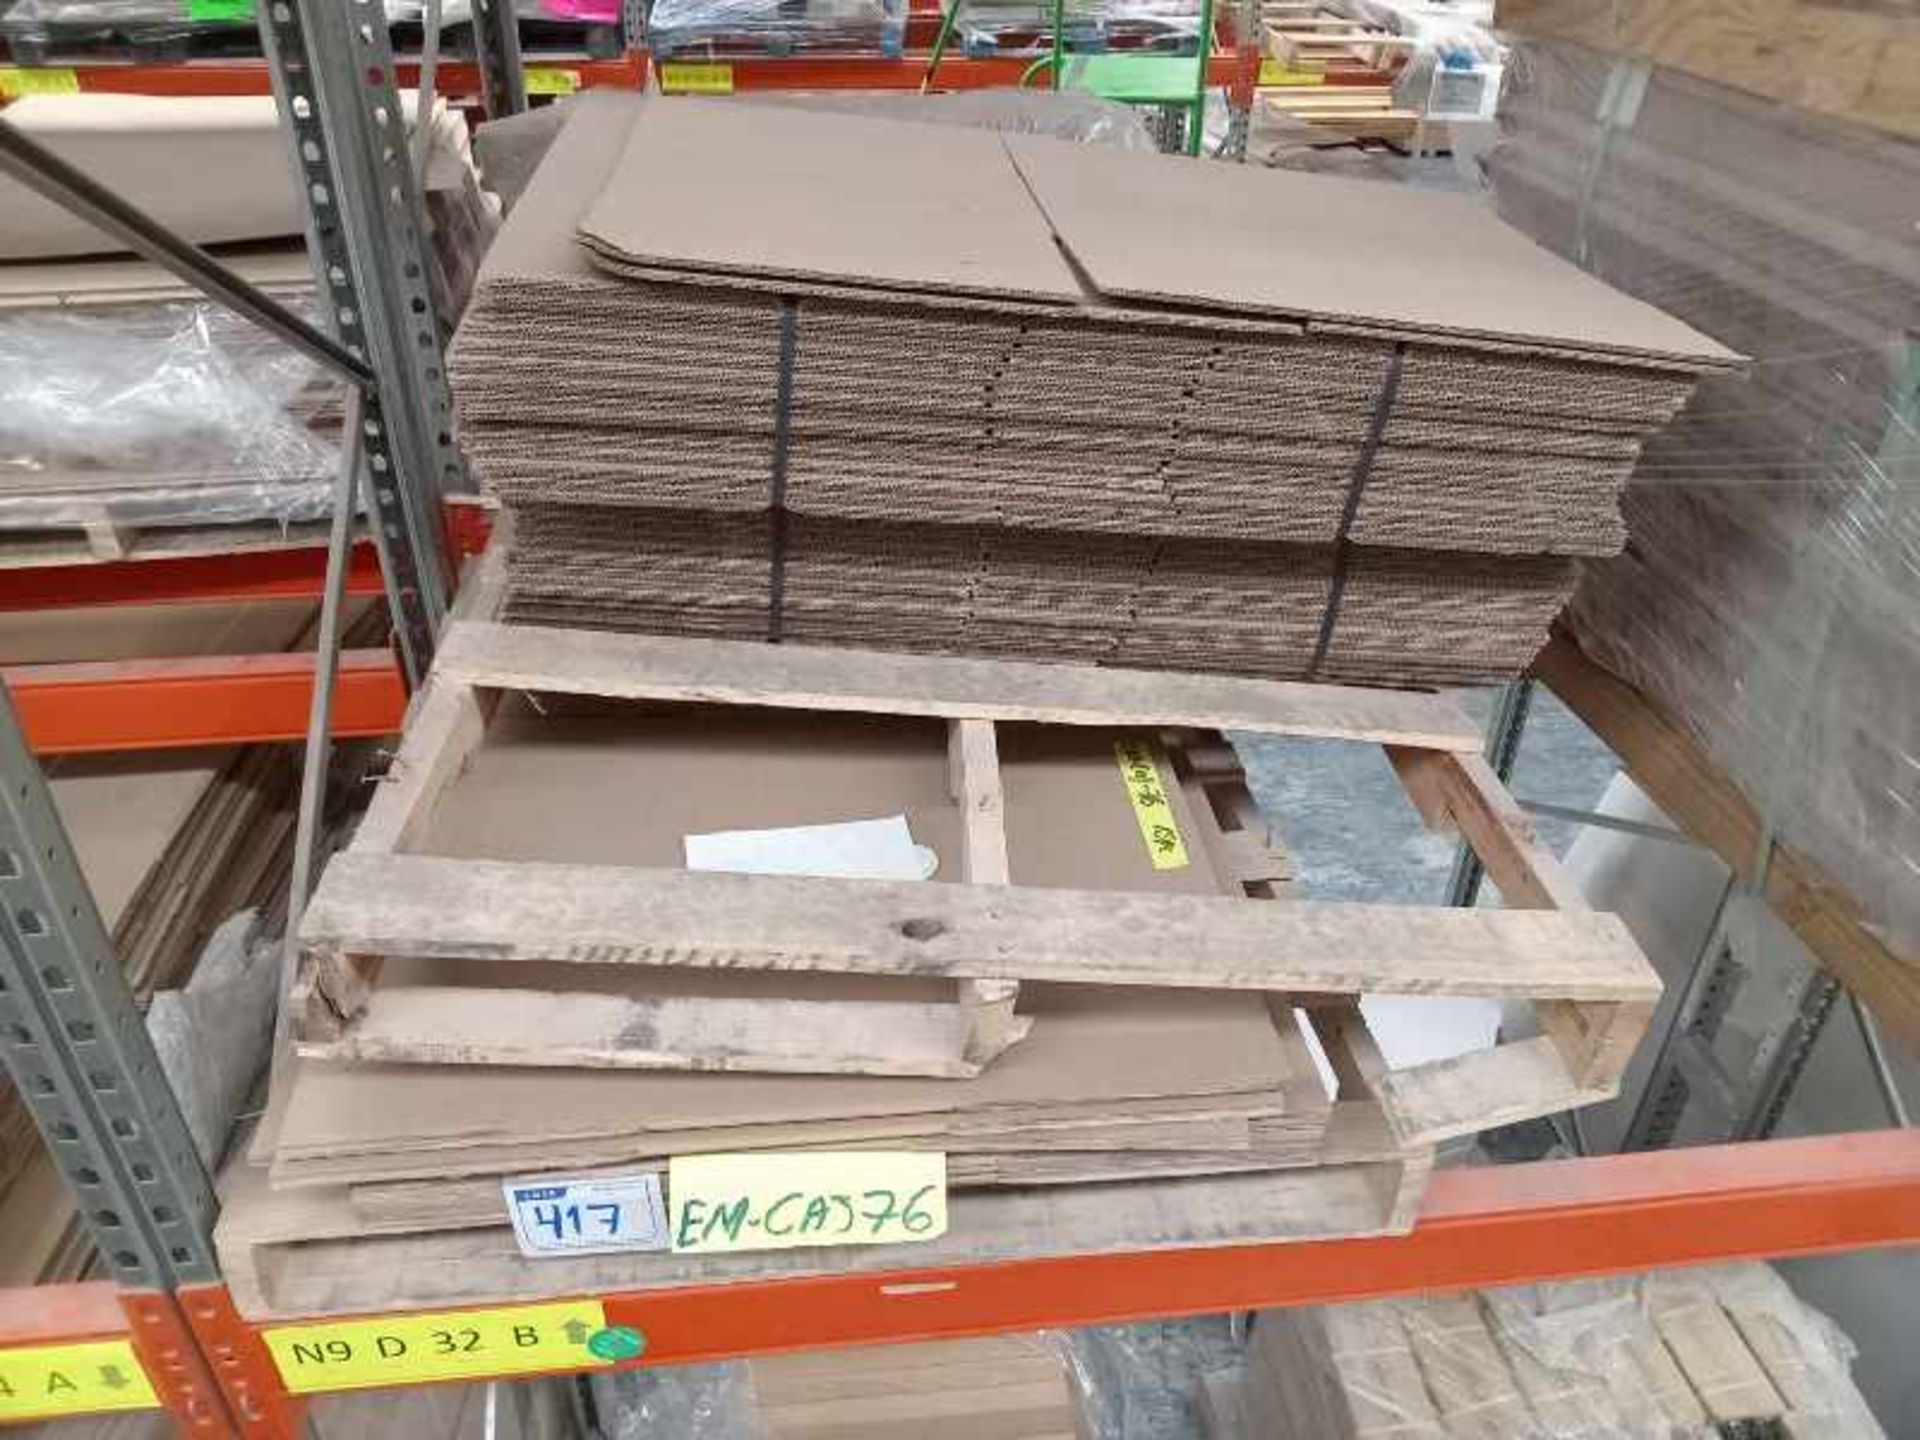 LOT OF APPROXIMATELY (83,310) PCS OF CARDBOARD BOXES AND ACCESSORIES - Image 28 of 119